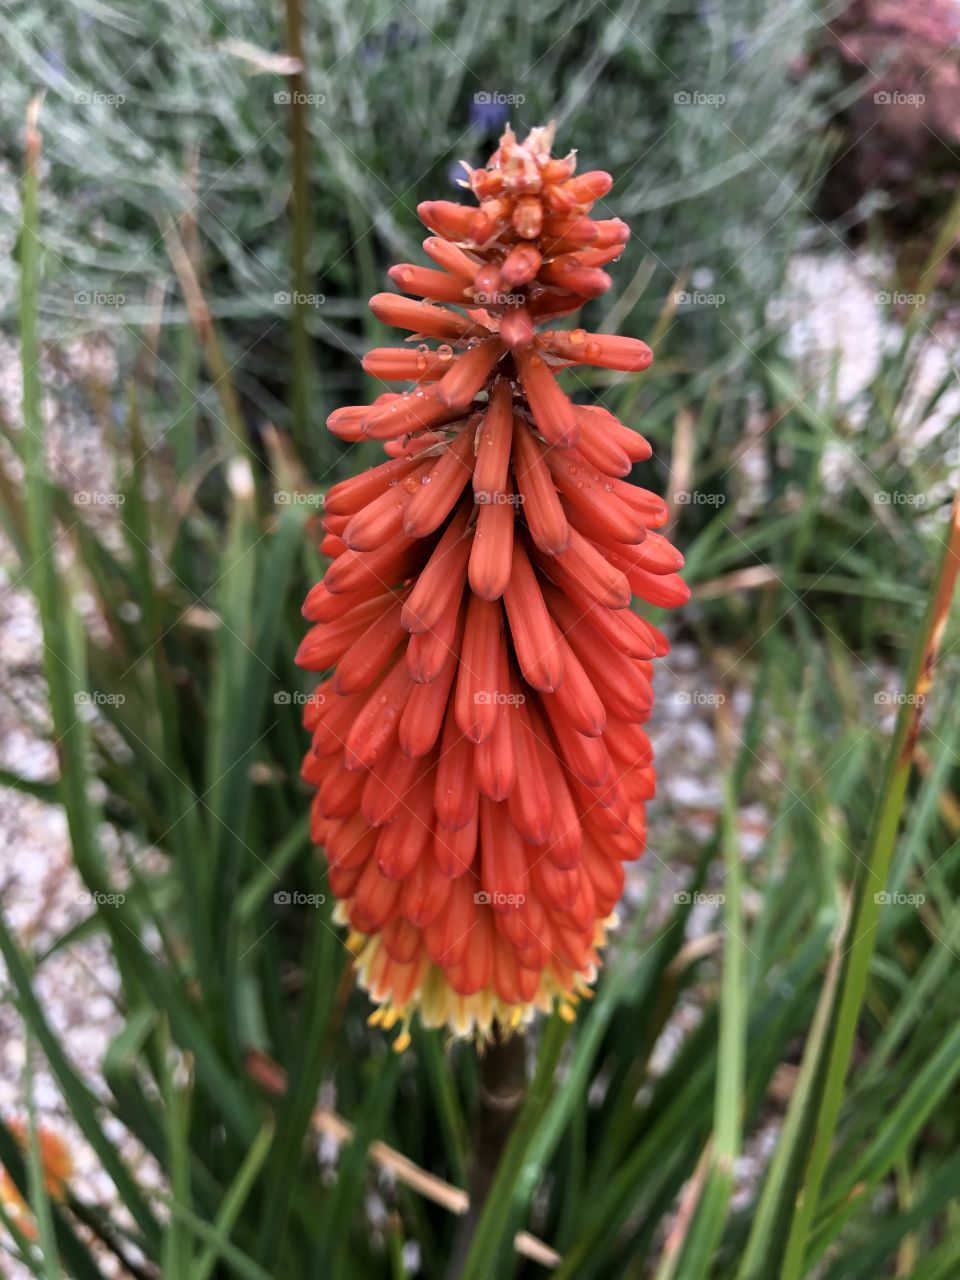 Red Hot Pokers found on. Coastal road in central Torquay in Devon